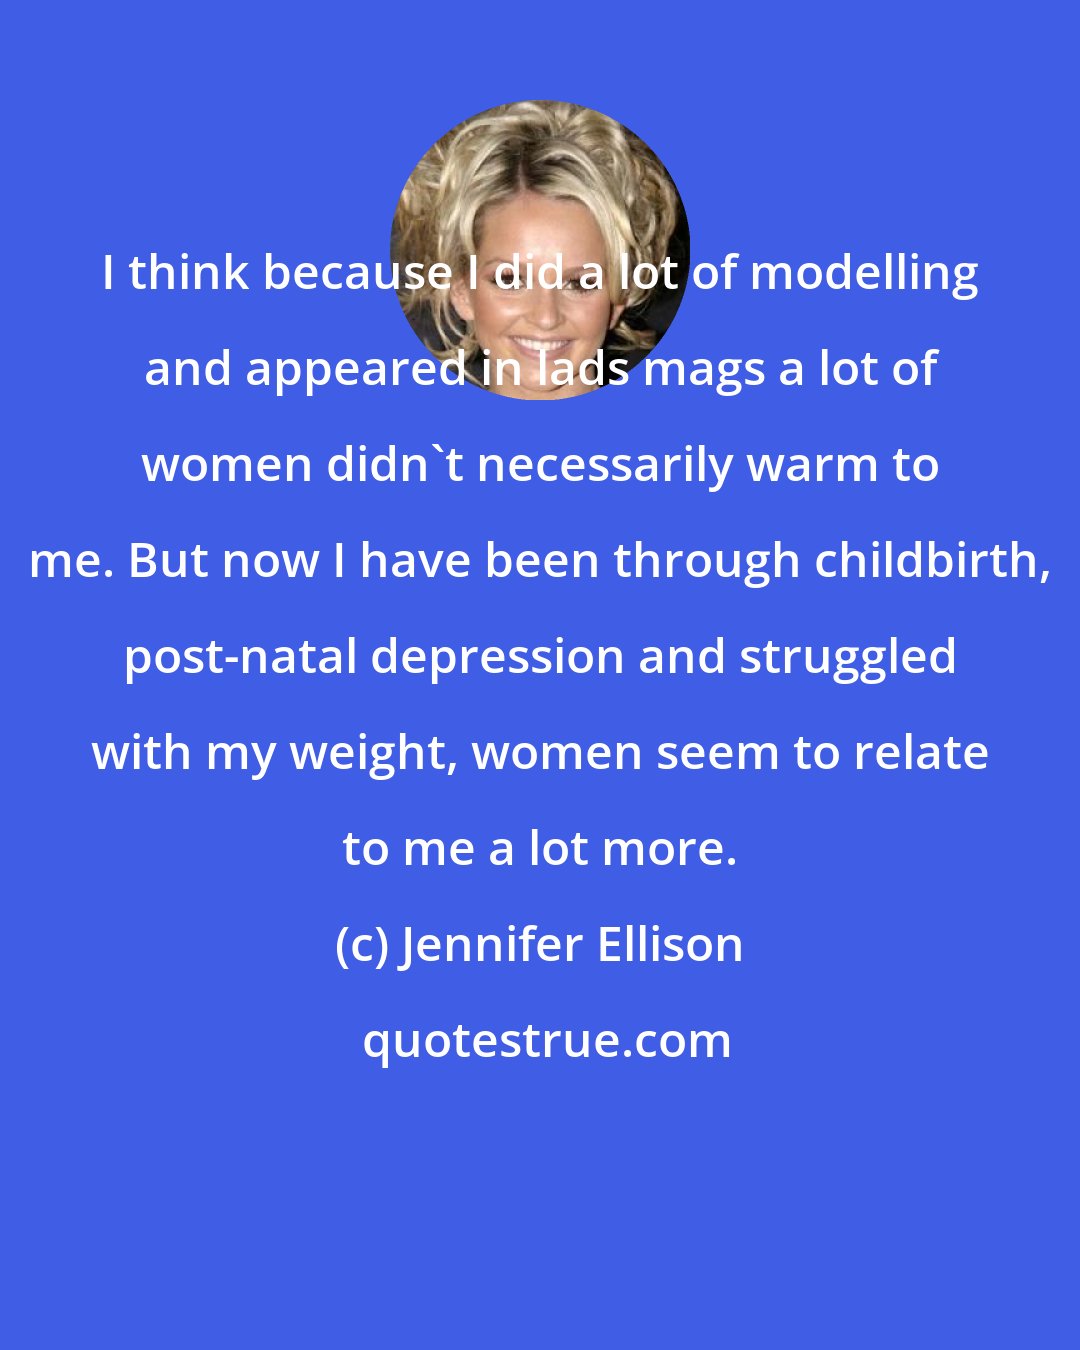 Jennifer Ellison: I think because I did a lot of modelling and appeared in lads mags a lot of women didn't necessarily warm to me. But now I have been through childbirth, post-natal depression and struggled with my weight, women seem to relate to me a lot more.